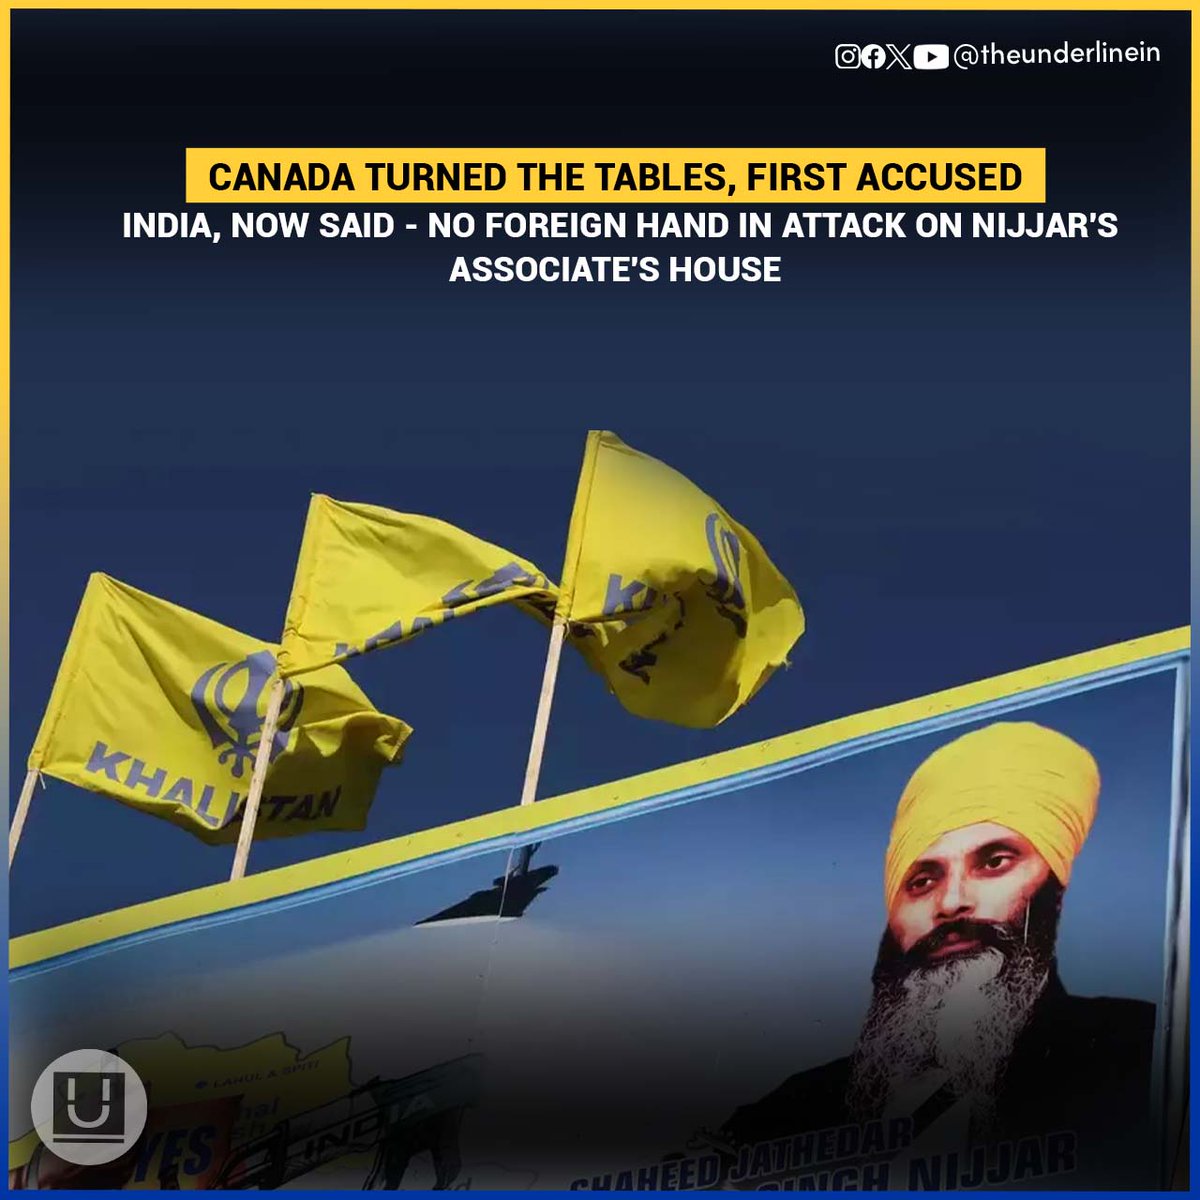 Canada turned the tables, first accused India, now said - no foreign hand in attack on Nijjar's associate's house

#Canada #canadaindiarelations #canadaindia #Khalistan #Khalistanis #KhalistanReferendum #HardeepSinghNijjar 

Canada Latest News: While sharing information, the